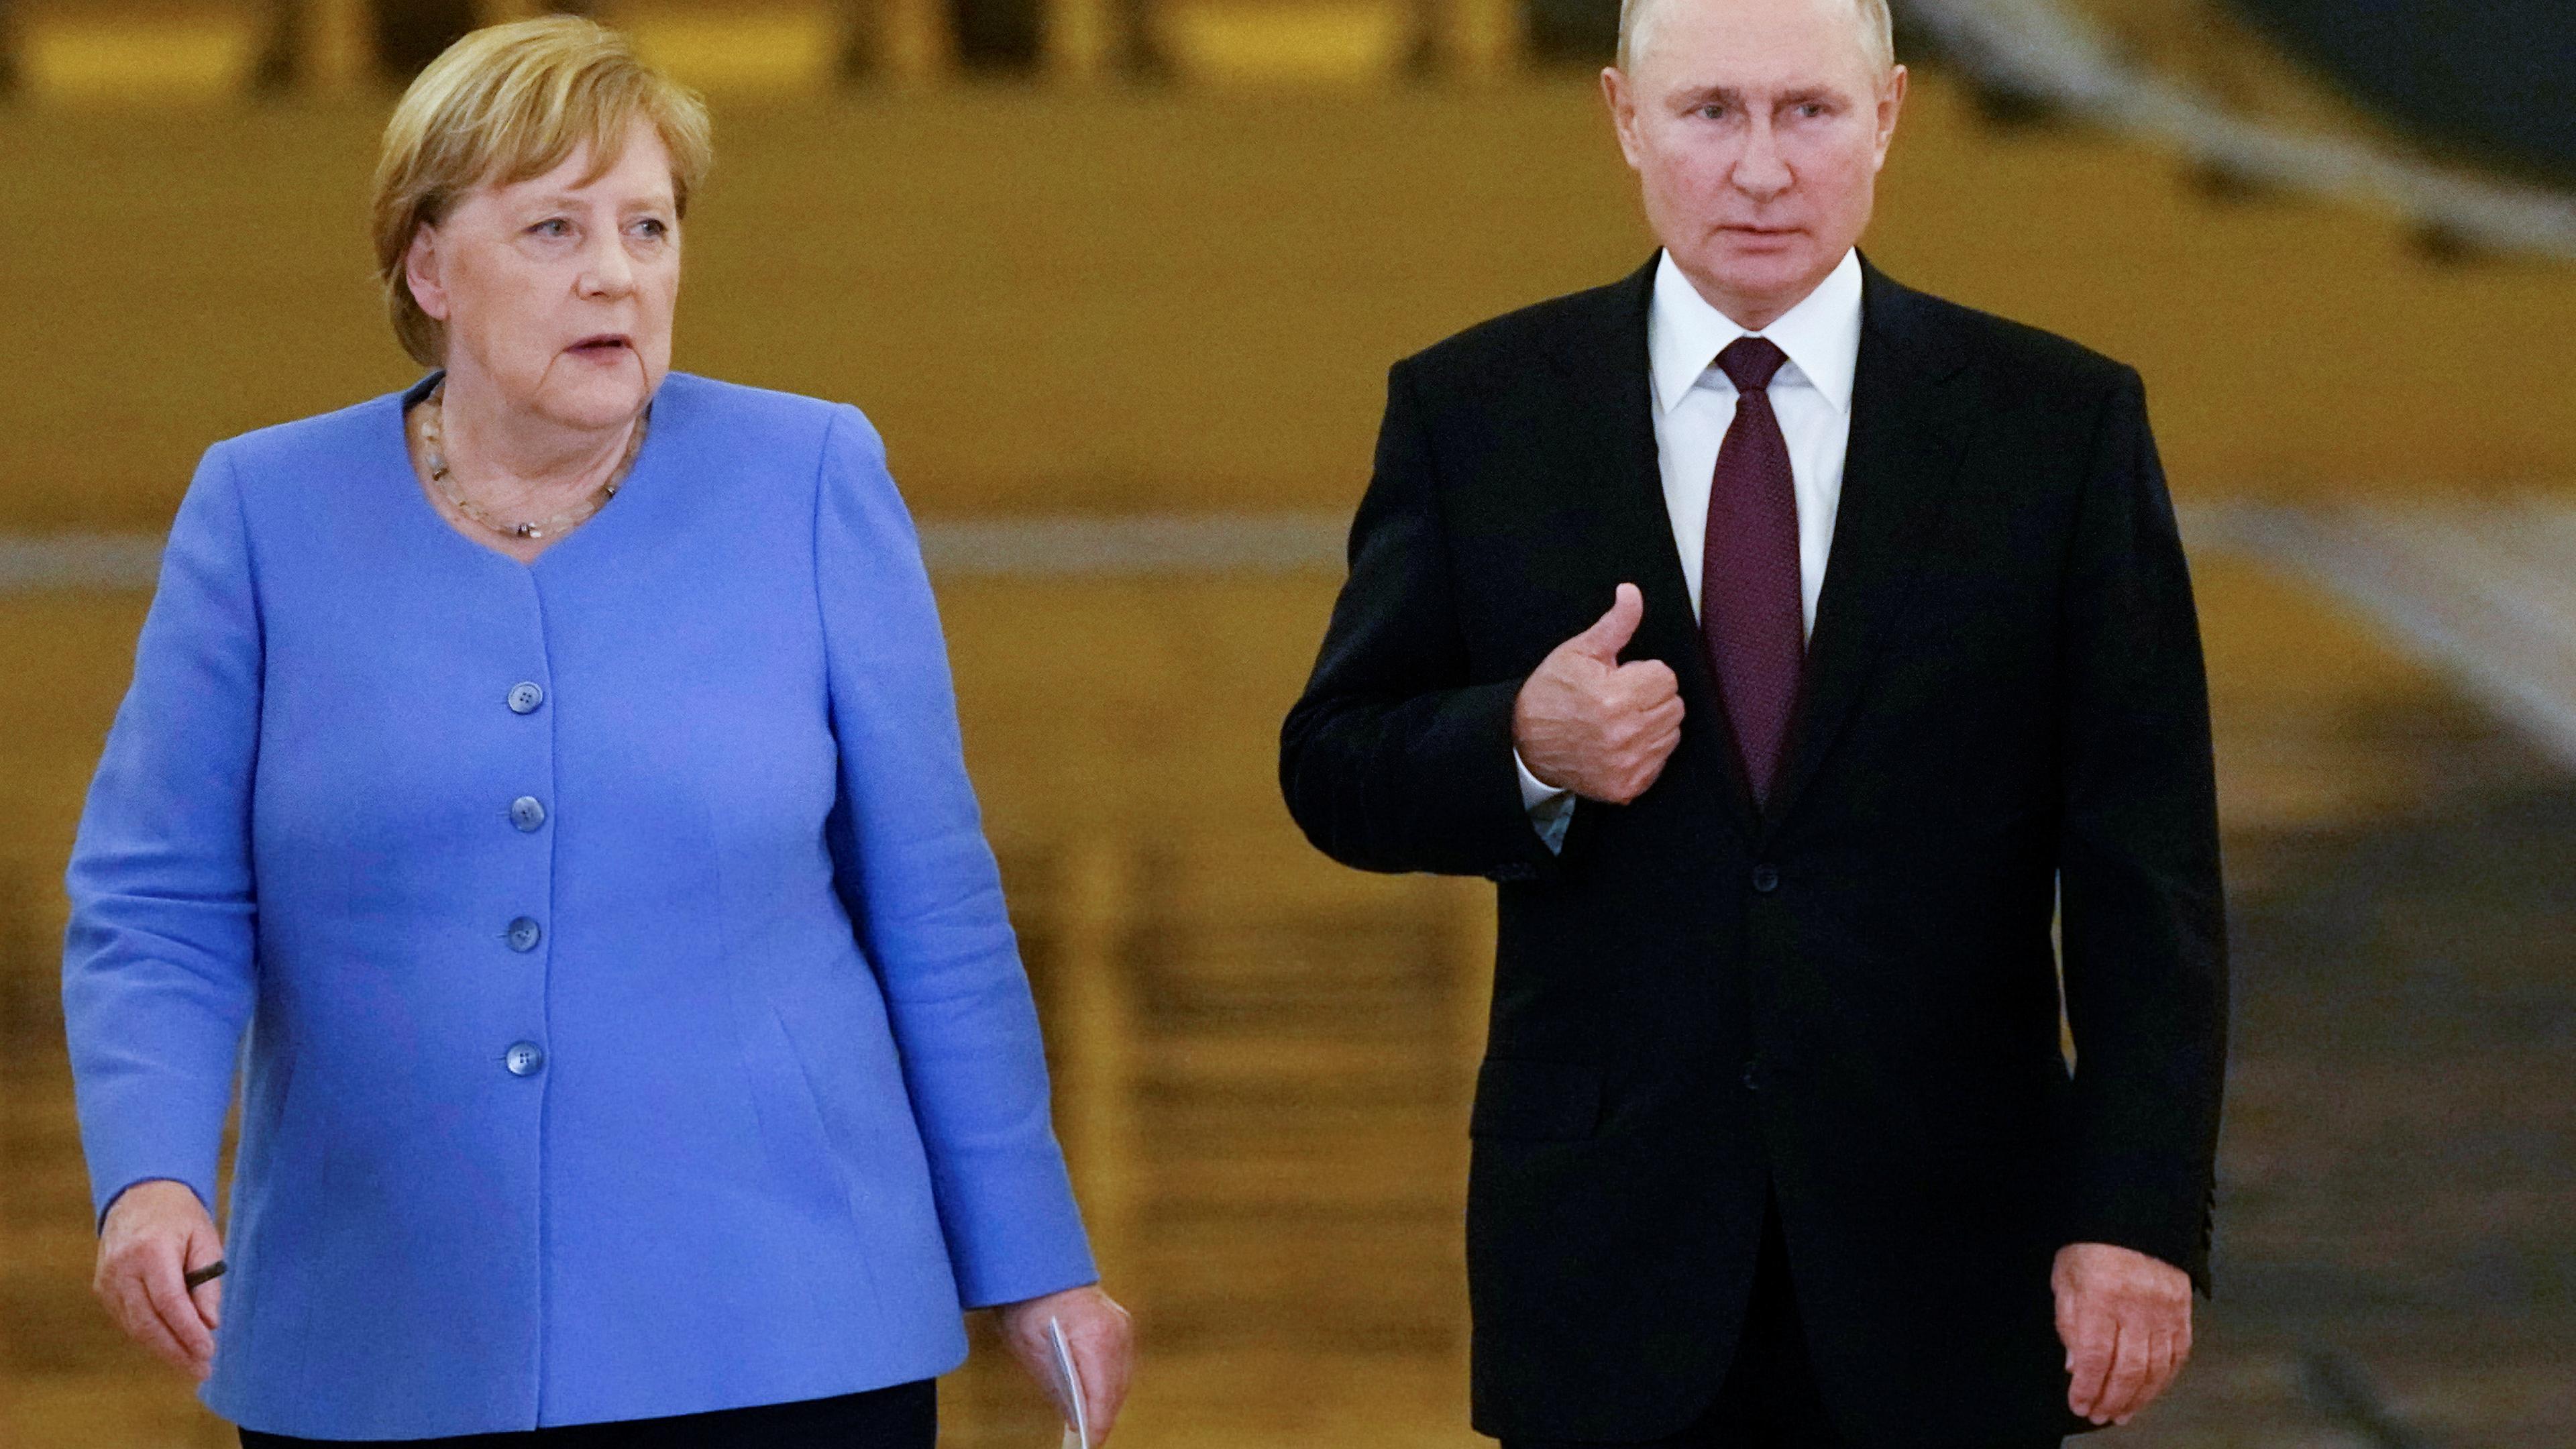 Russian President Wladimir Putin and German Chancellor Angela Merkel enter a hall during a news conference following their talks at the Kremlin in Moscow, Russia